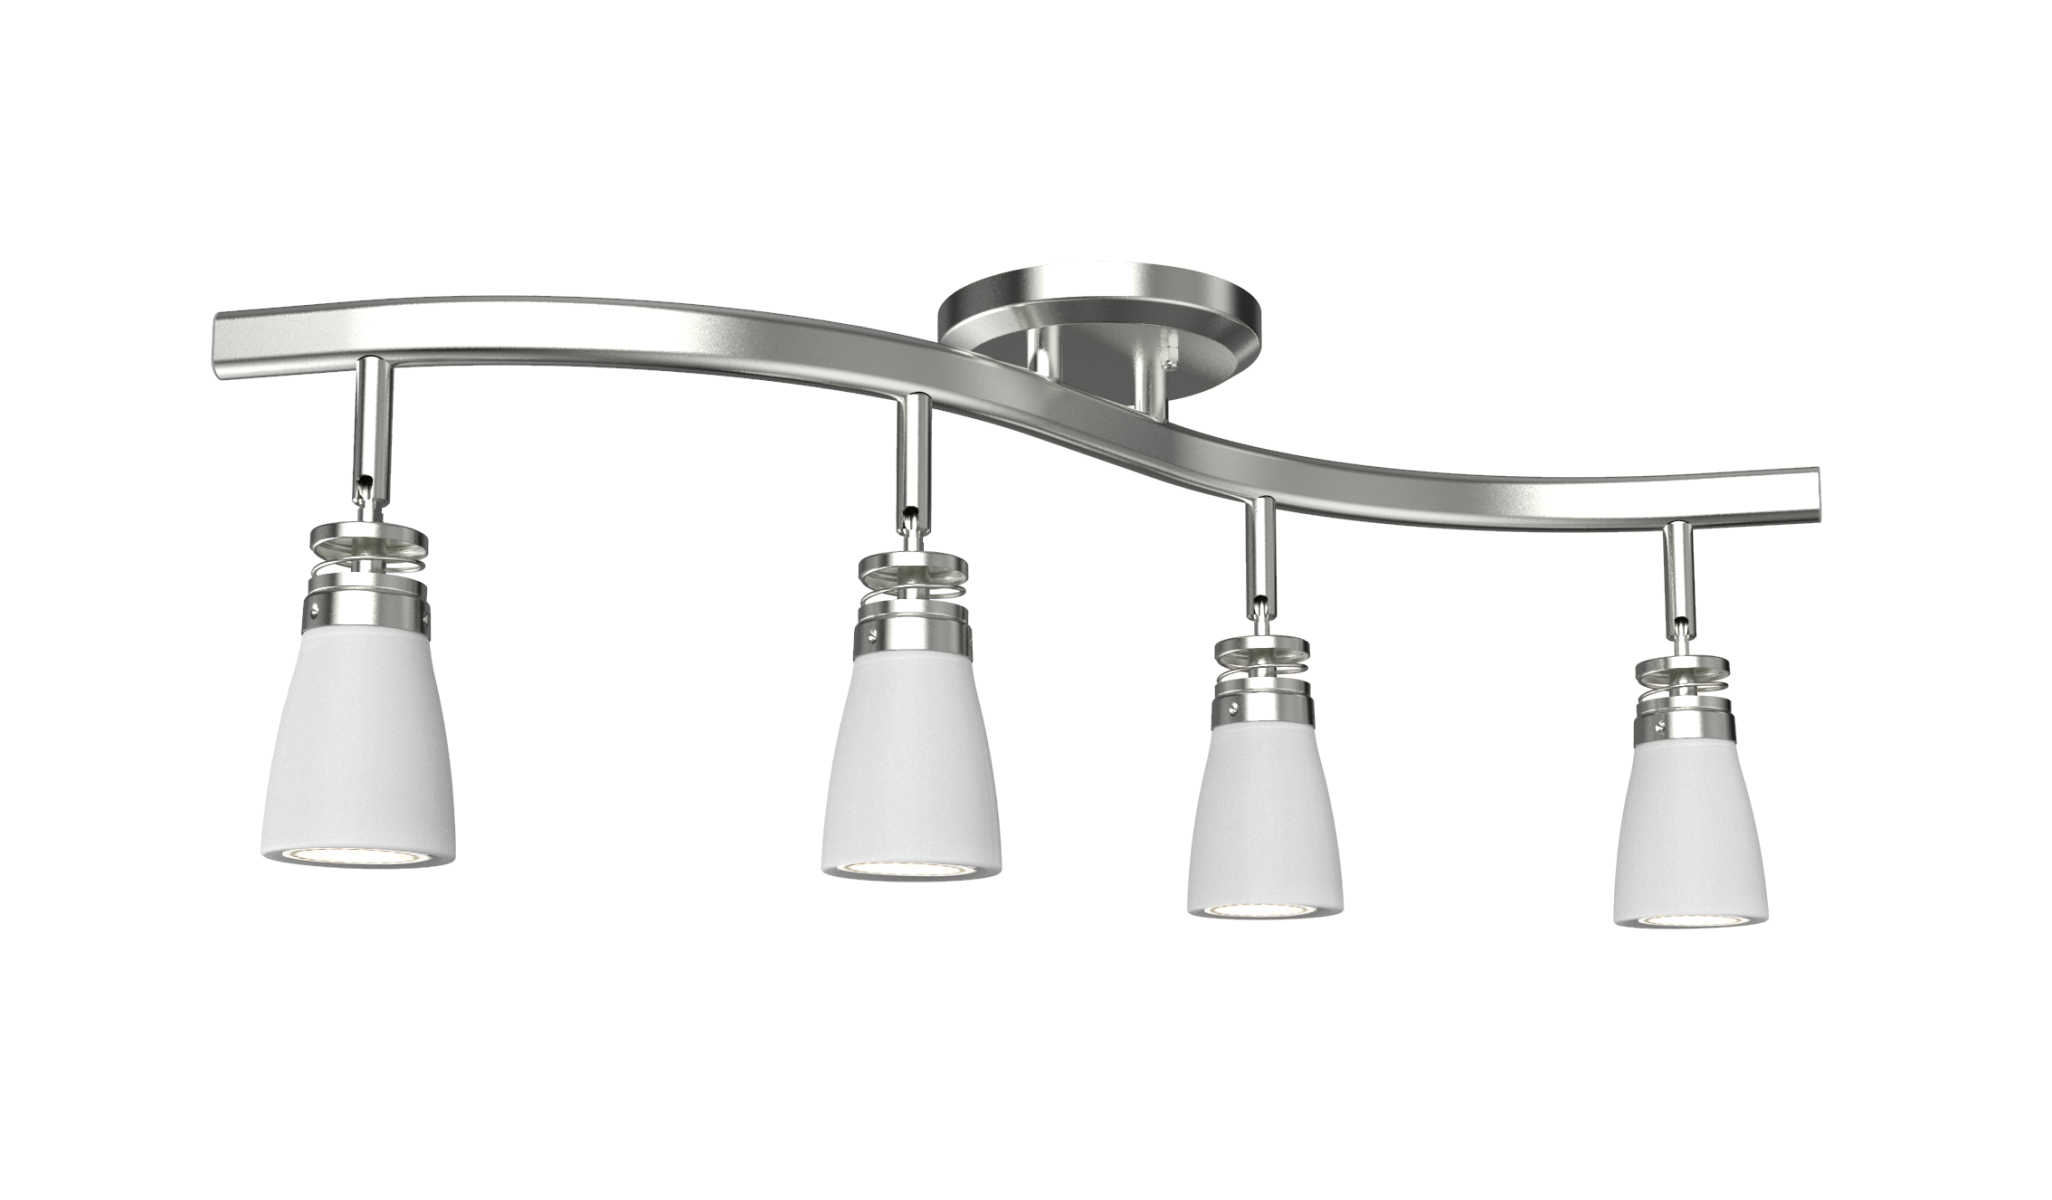 Modern Gloss White & Silver Chrome Single Ceiling/Wall Spotlight Fitting 3000K Warm White Complete with a 5w LED GU10 Light Bulb 